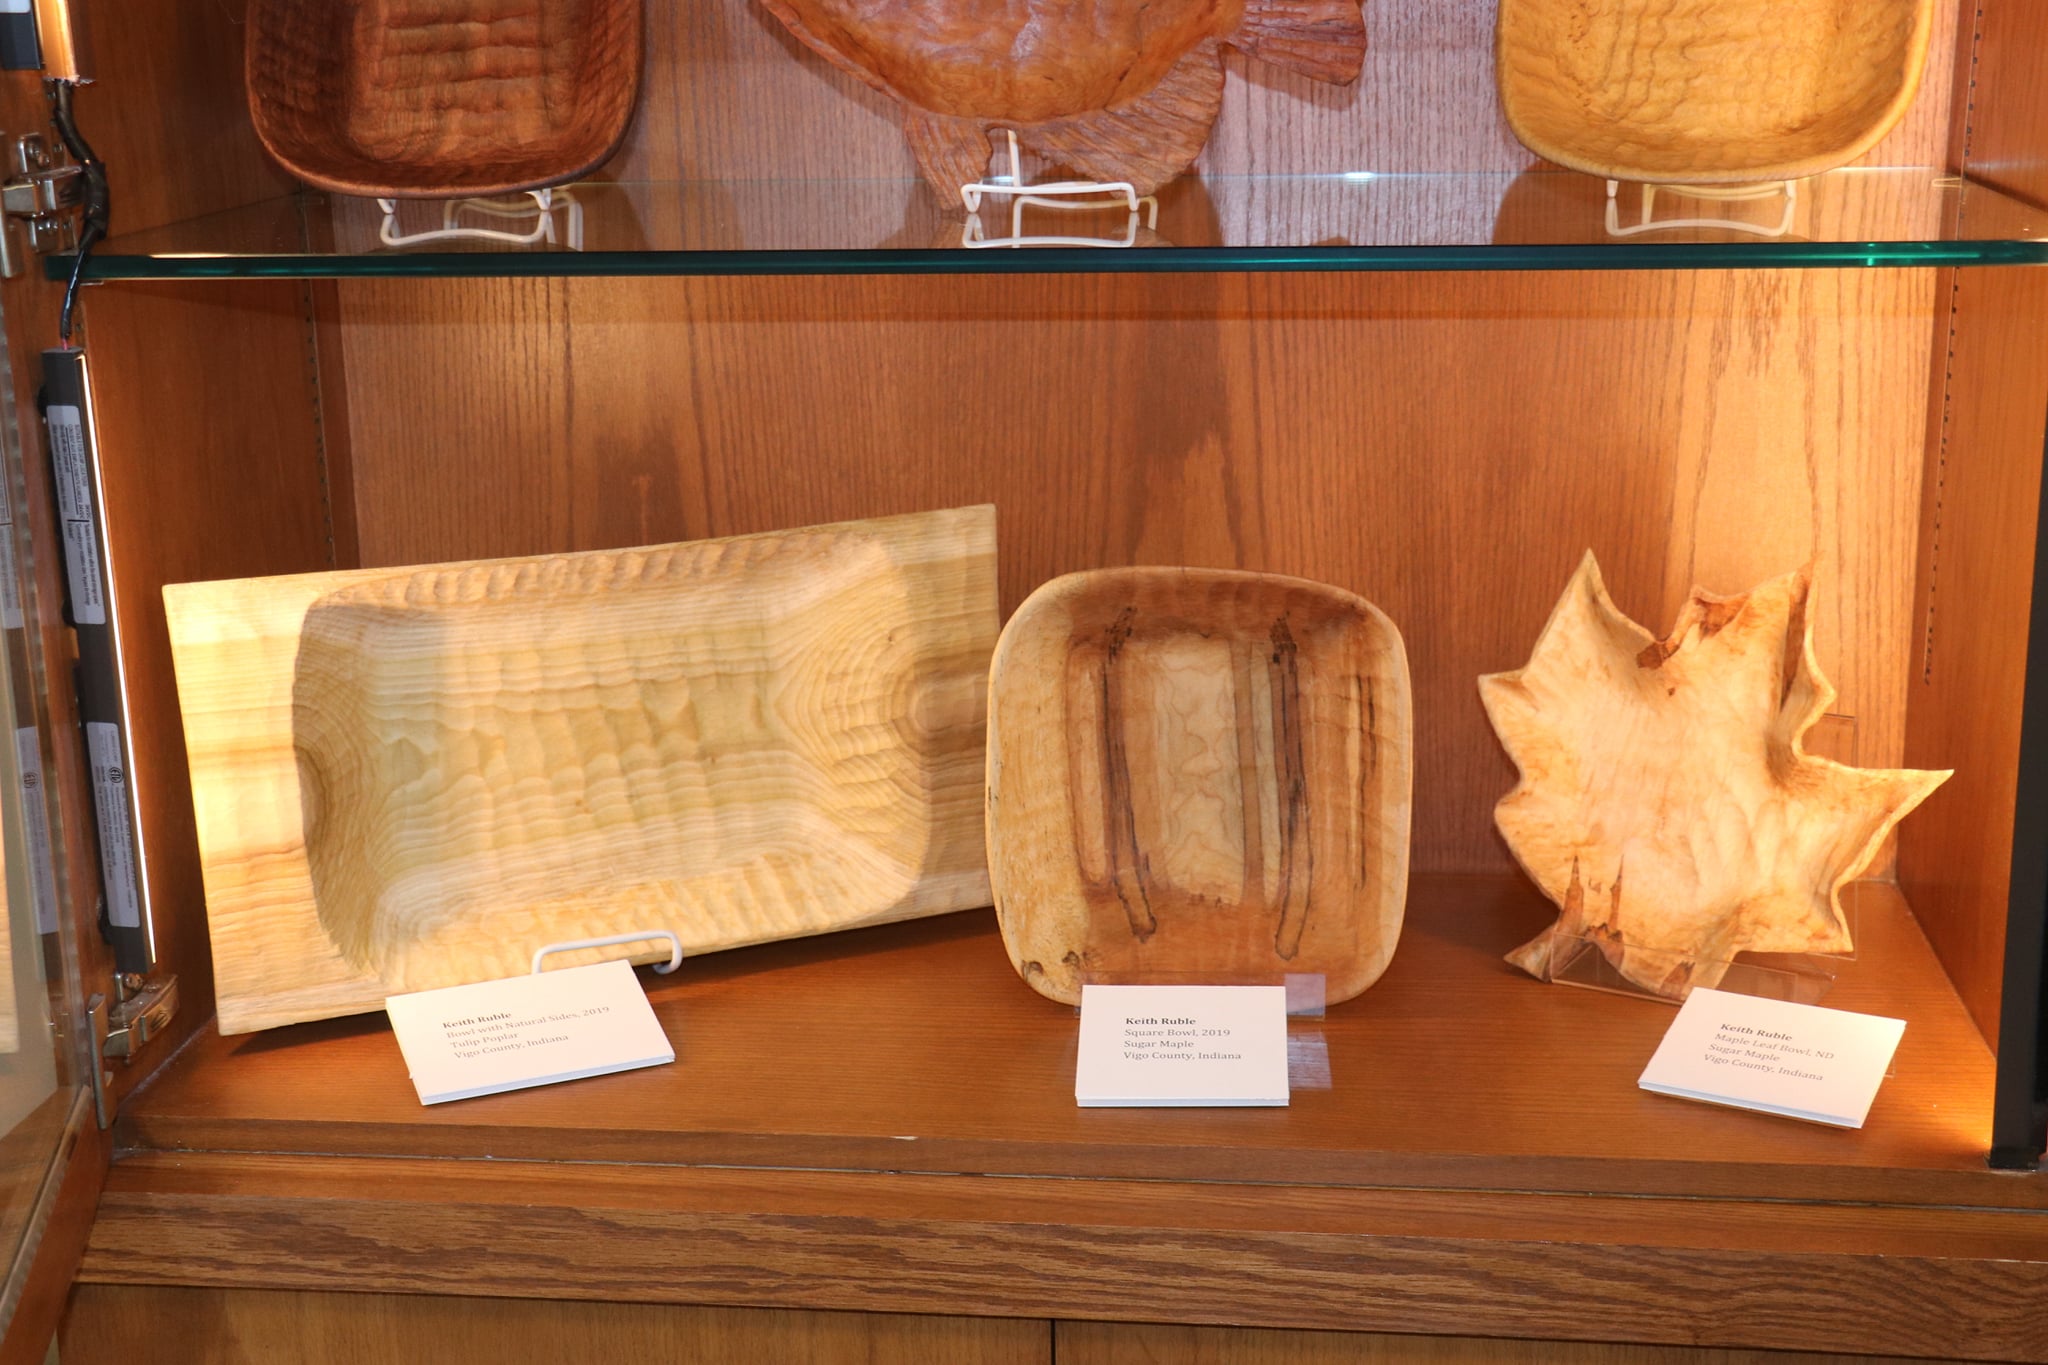 Three wooden bowls on display. One is shaped like a maple leaf.